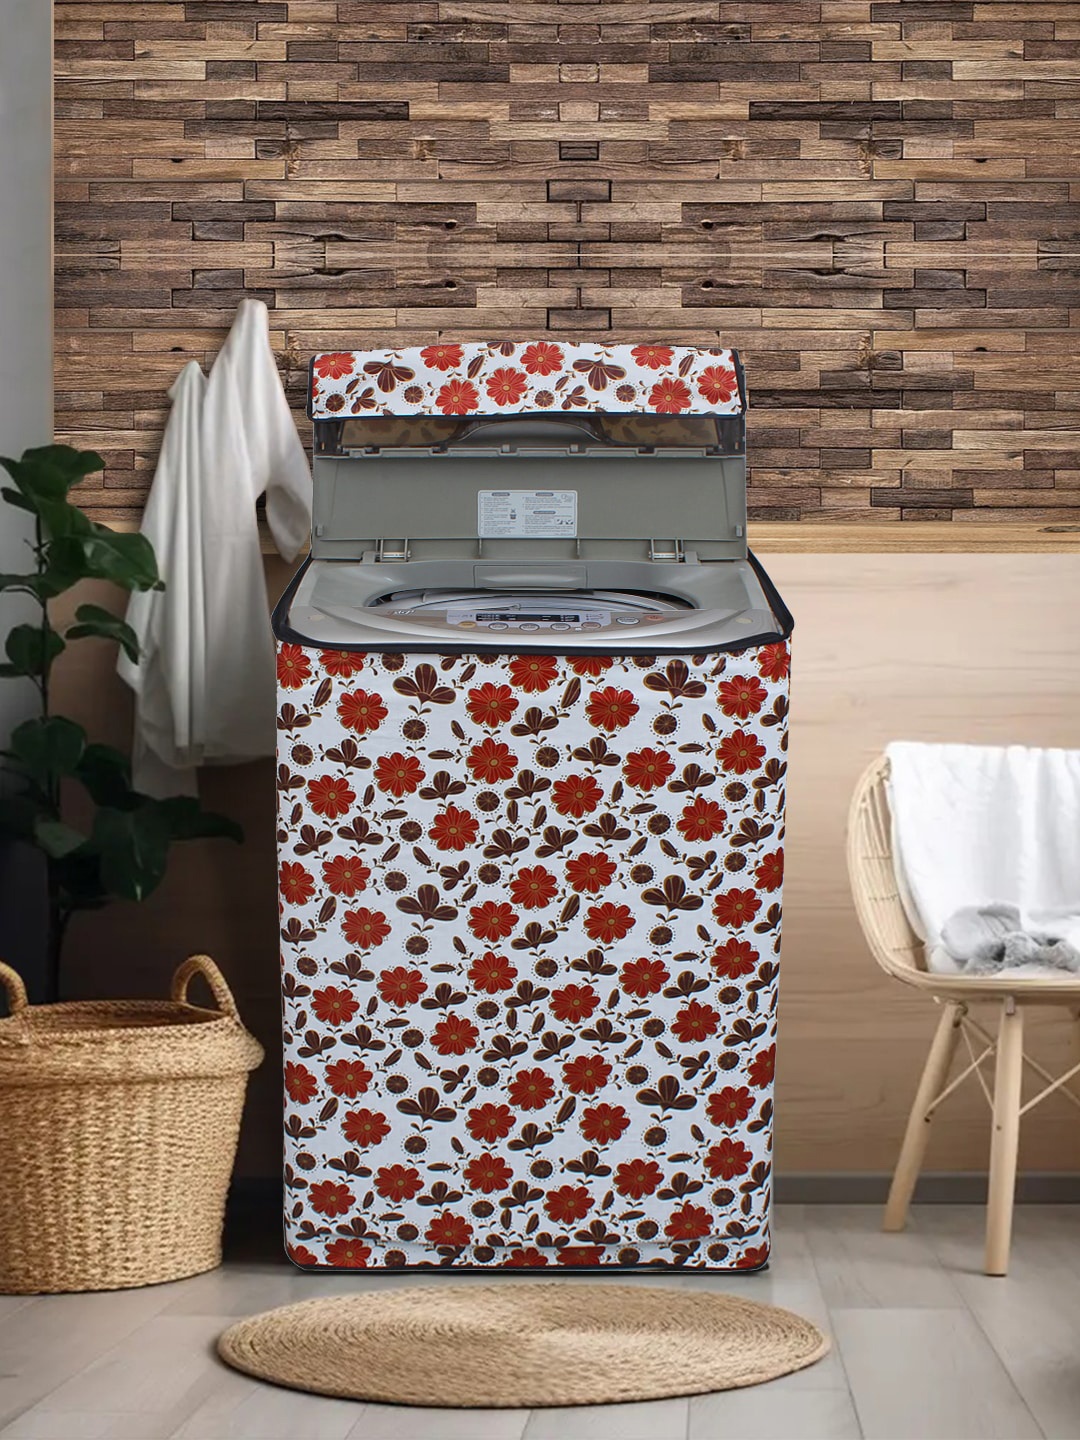 

DREAM CARE Grey & Red Printed Waterproof and Dustproof Washing Machine Cover Top Load